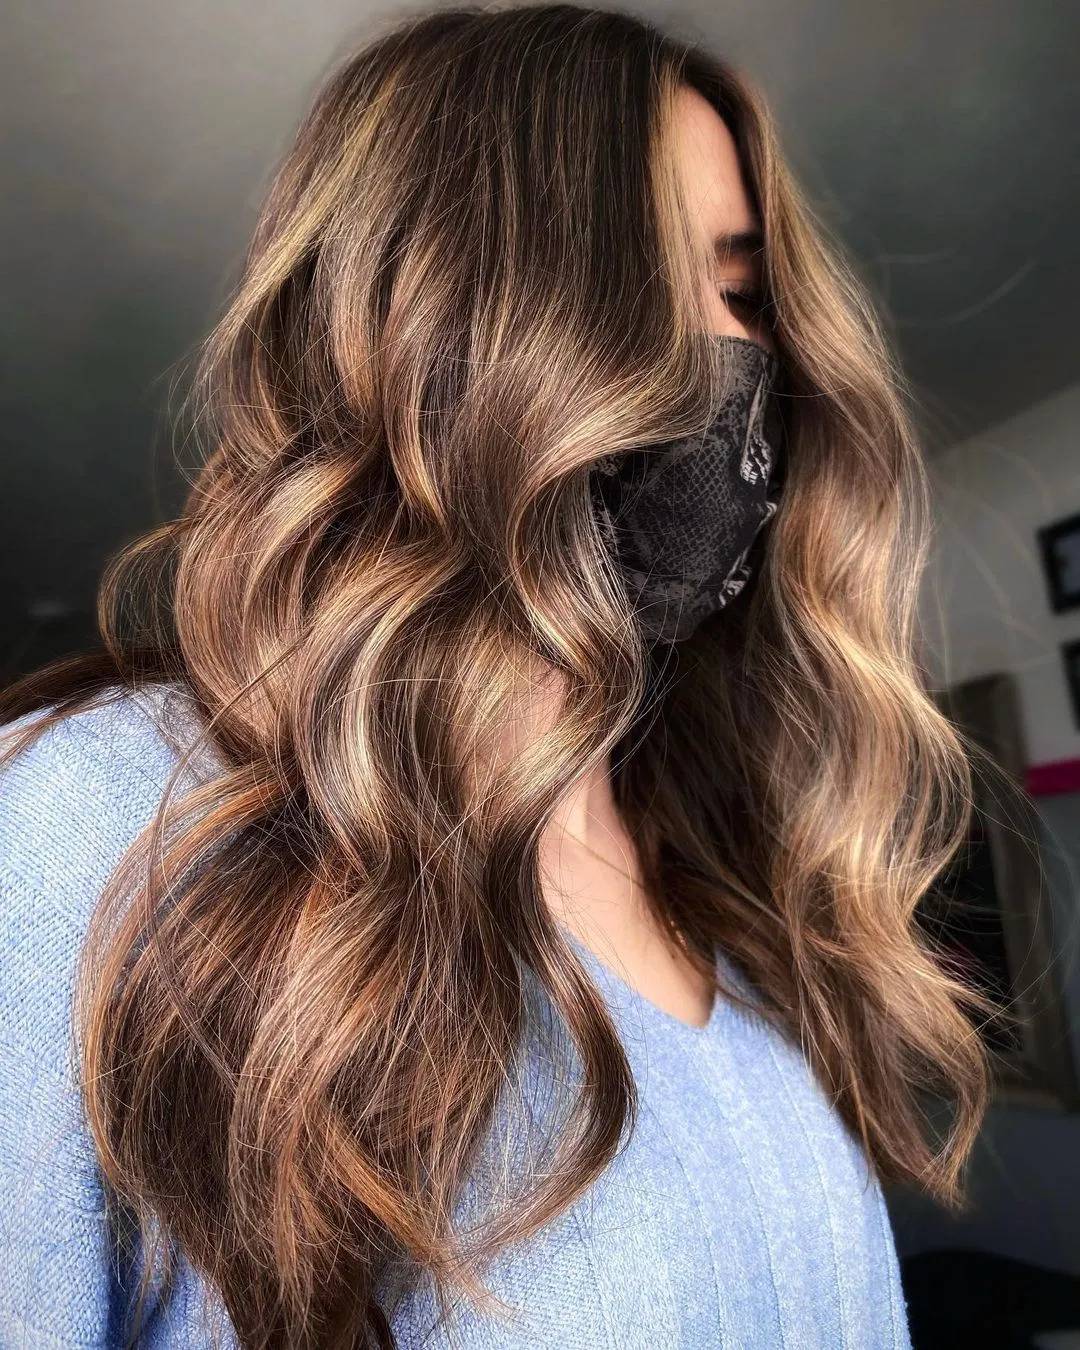 27 Gorgeous Golden Brown Hair Ideas To Make You Stunning Like A Model 13